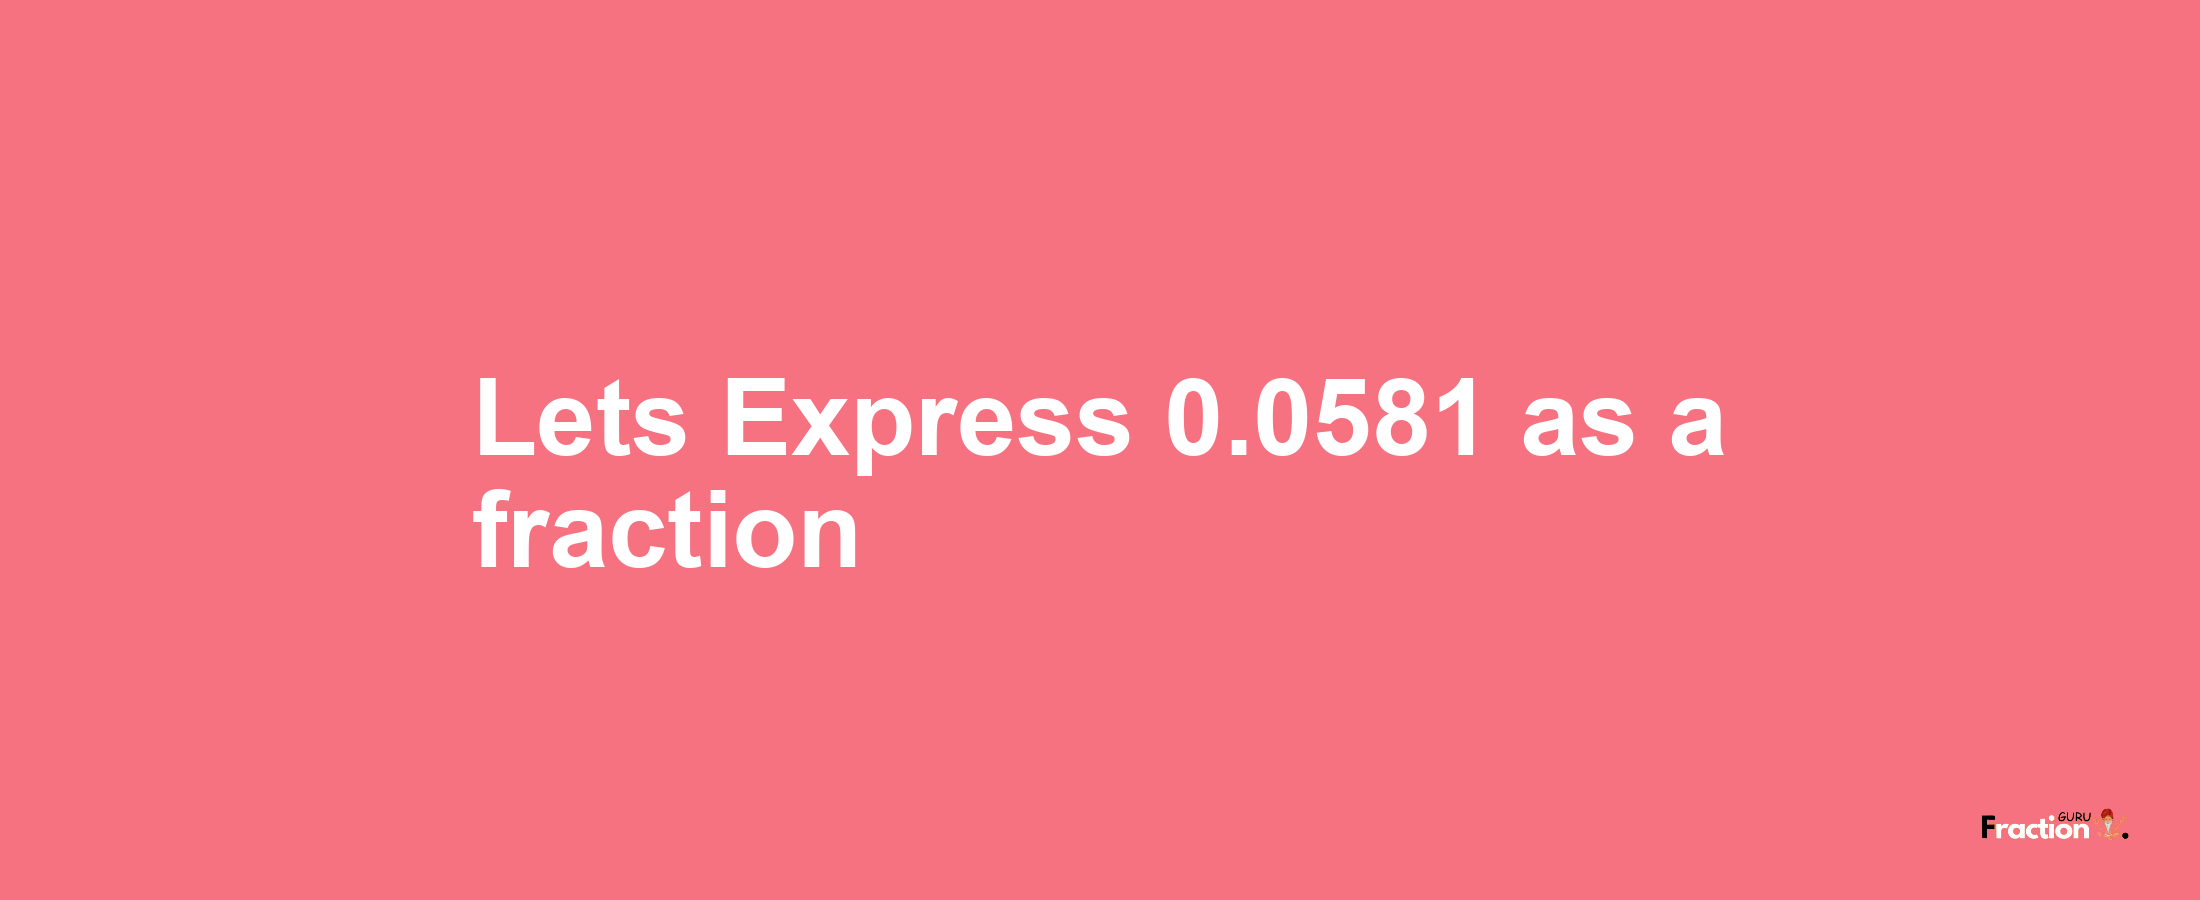 Lets Express 0.0581 as afraction